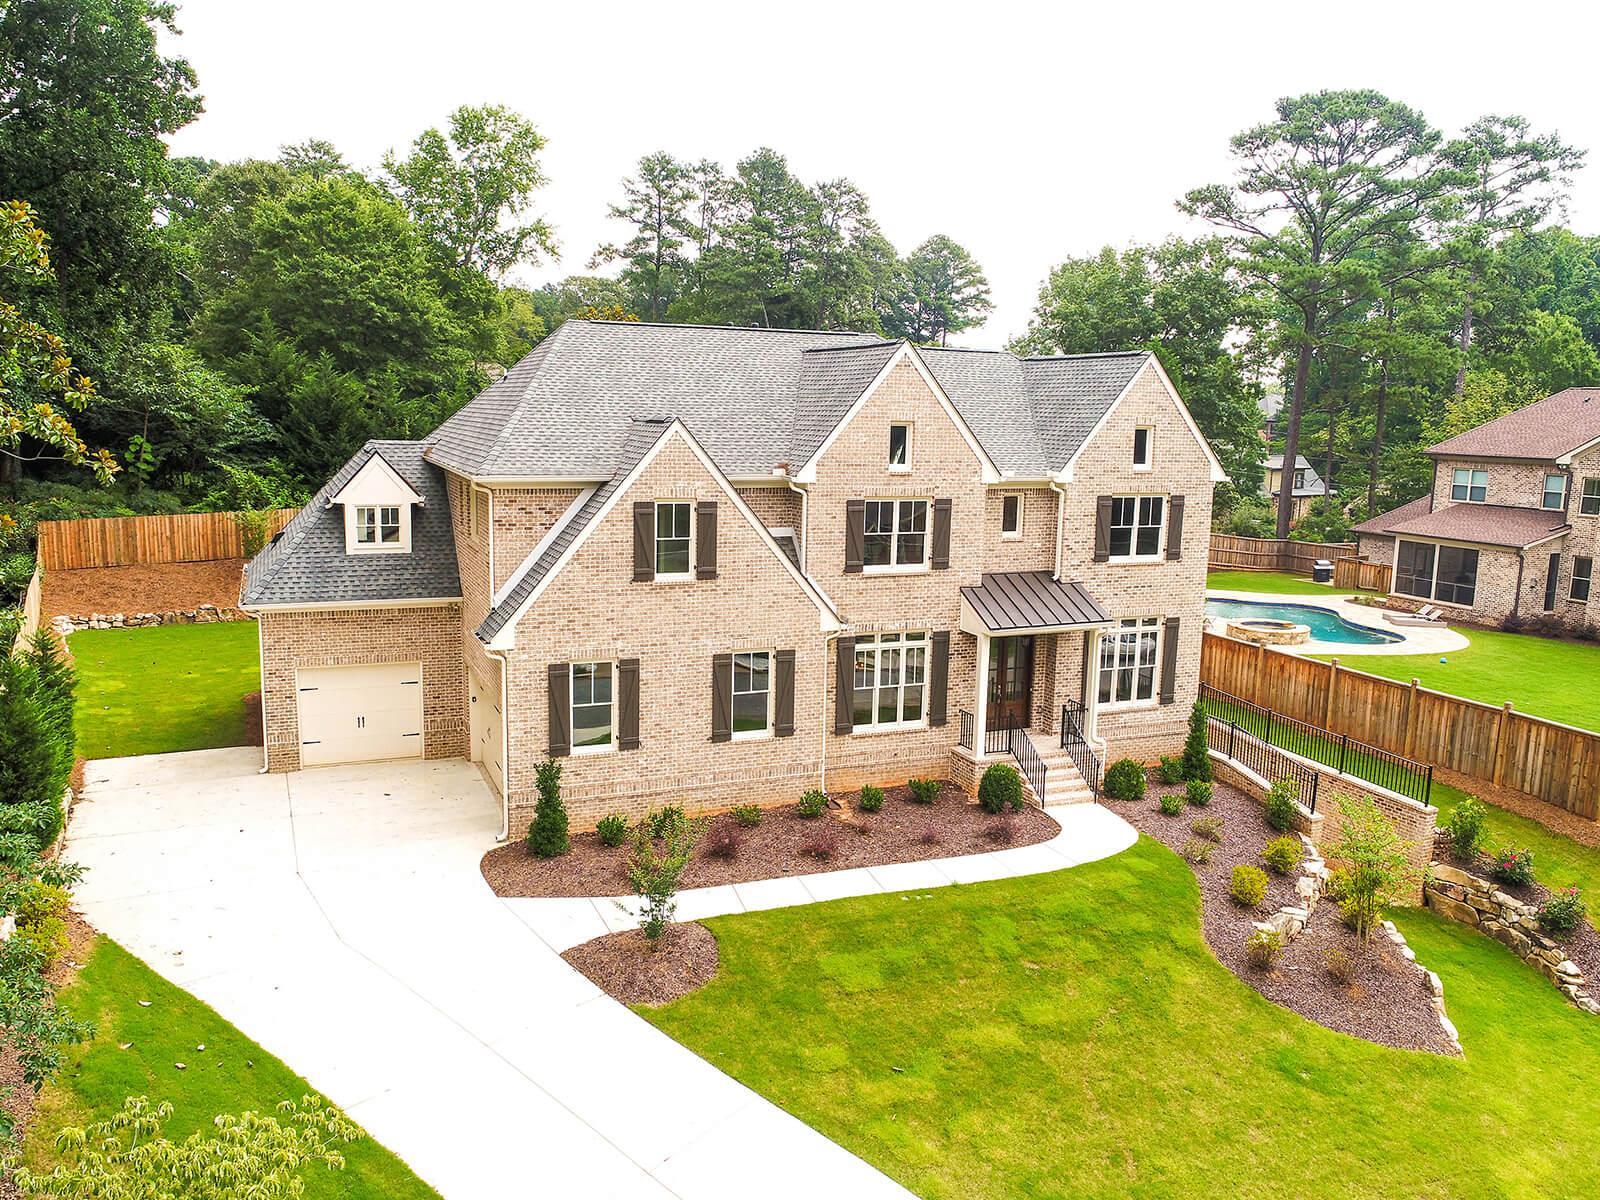 Real Estate Aerial Drone Photography and Real Estate Photographer